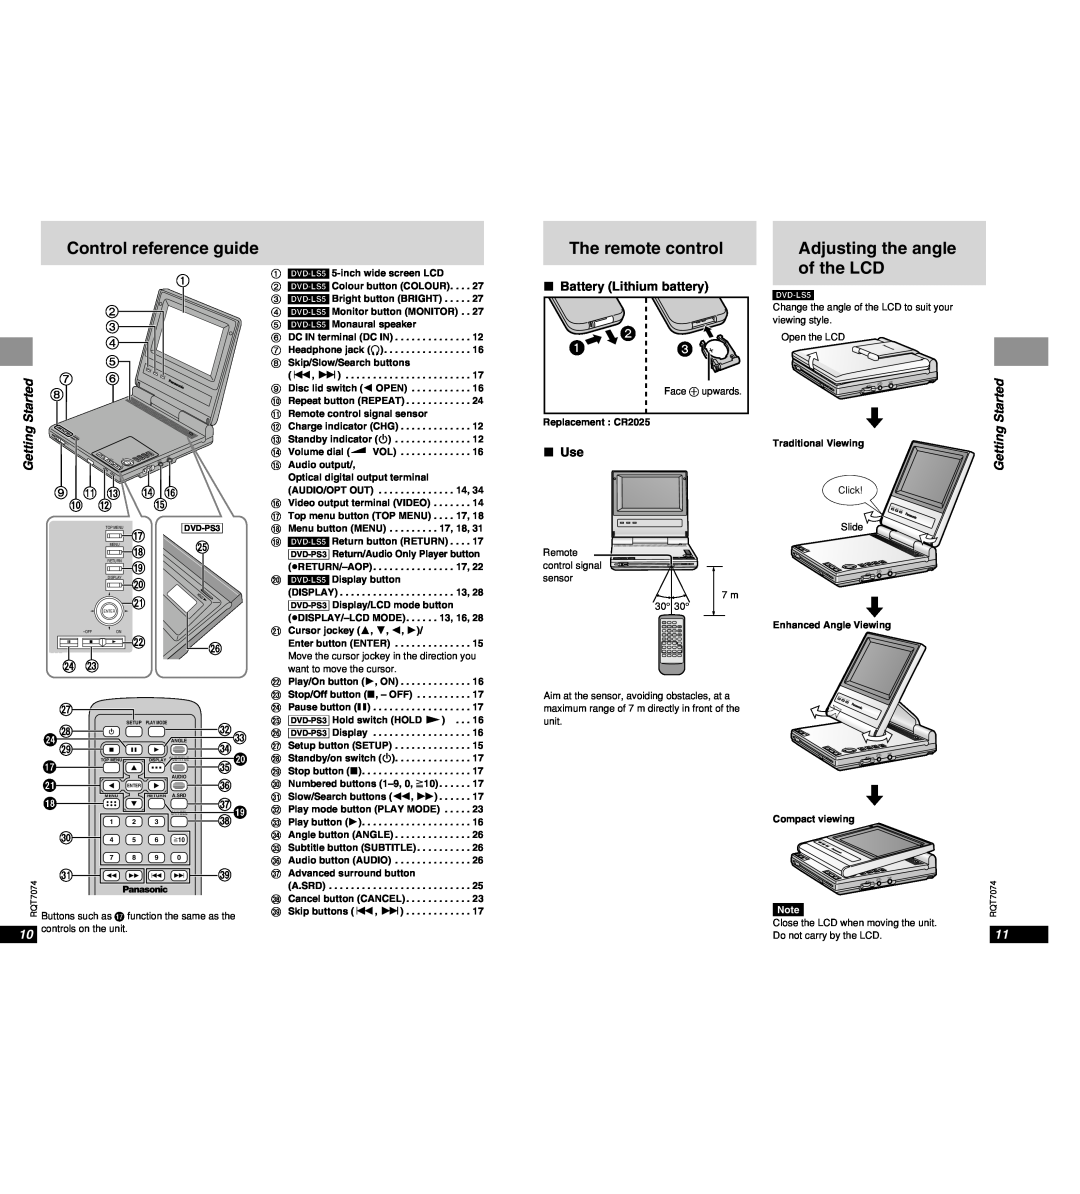 Panasonic DVD-PS3 operating instructions Control reference guide, The remote control, Adjusting the angle of the LCD 